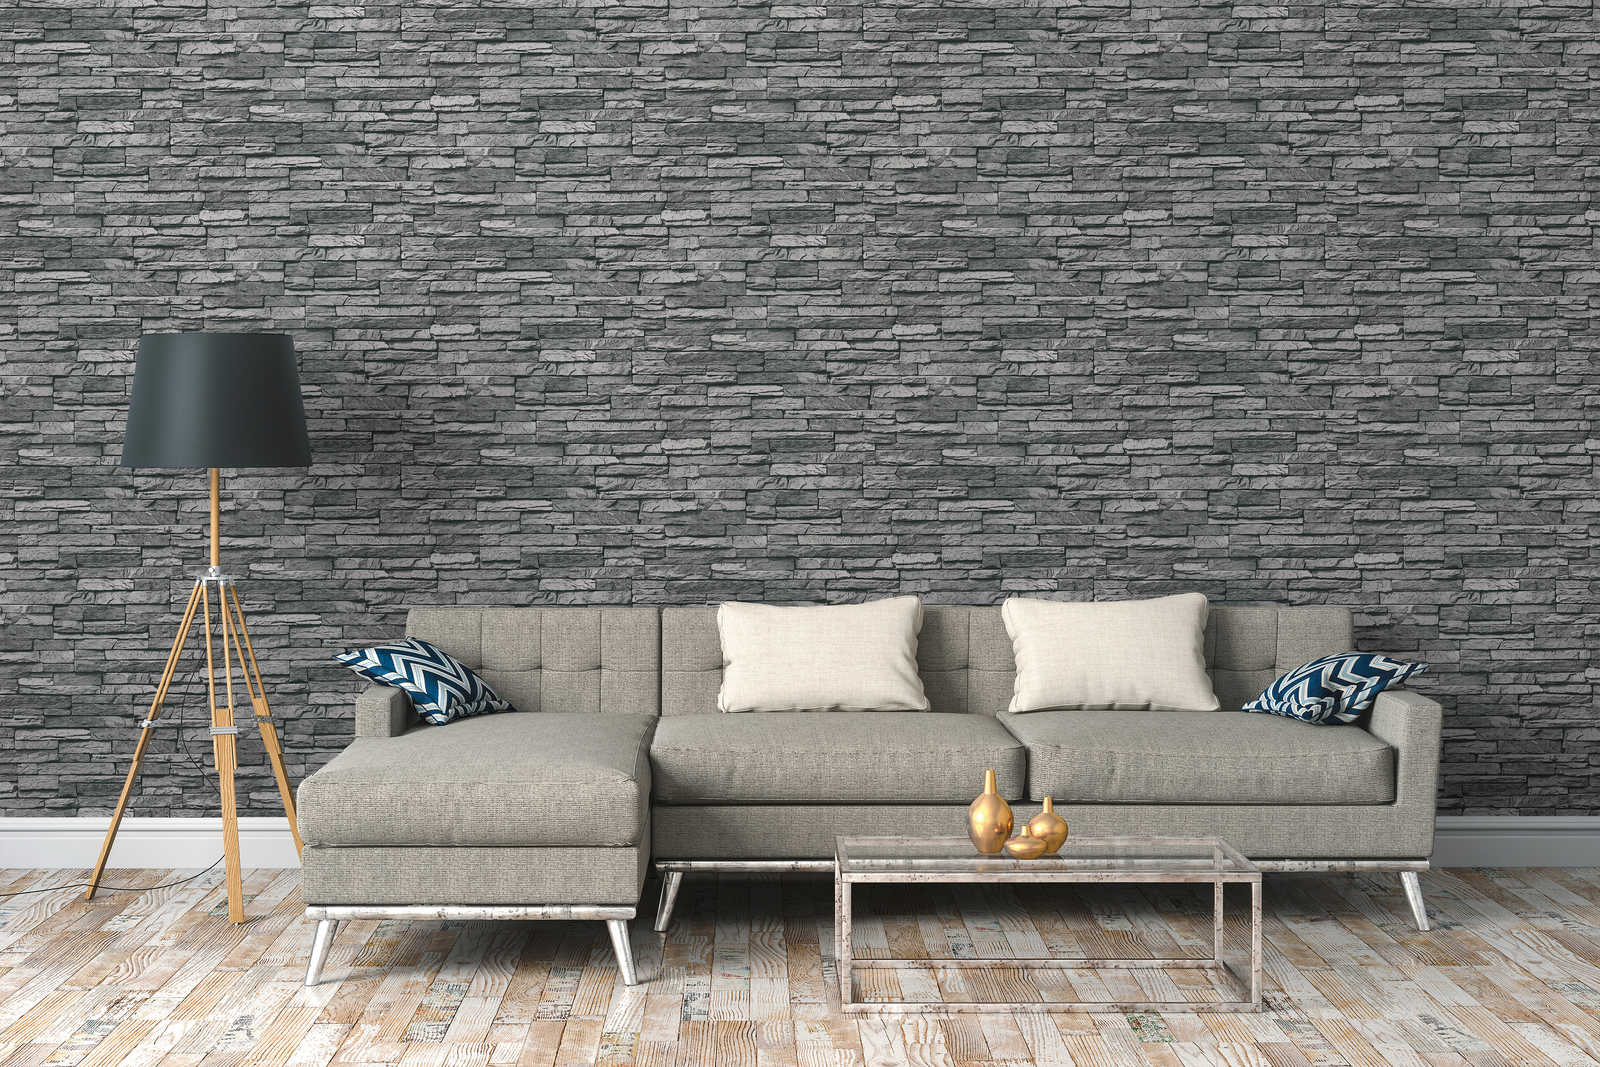             Self-adhesive wallpaper | natural stone look with 3D effect - grey, black
        